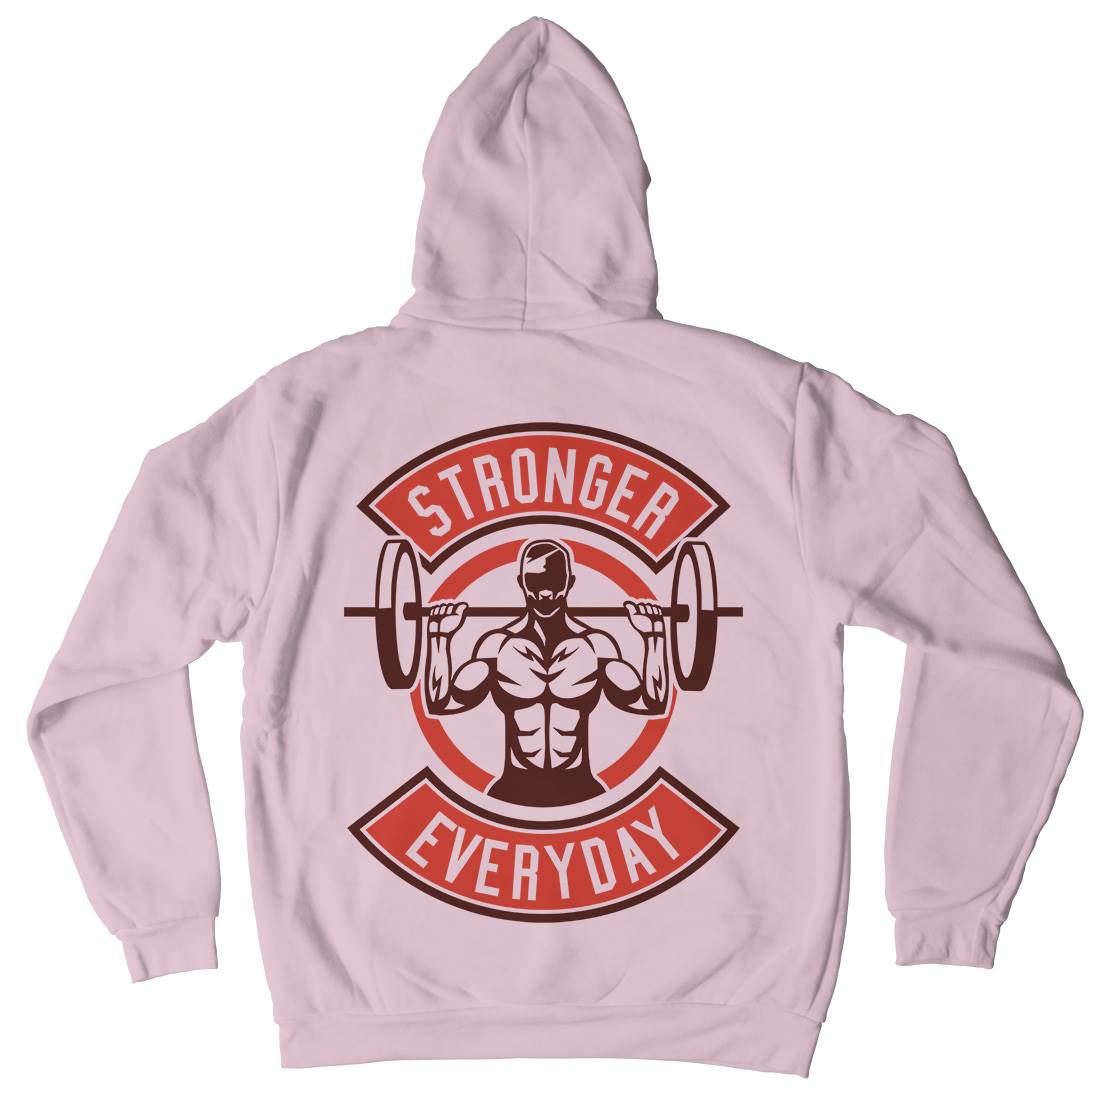 Stronger Everyday Kids Crew Neck Hoodie Gym A289